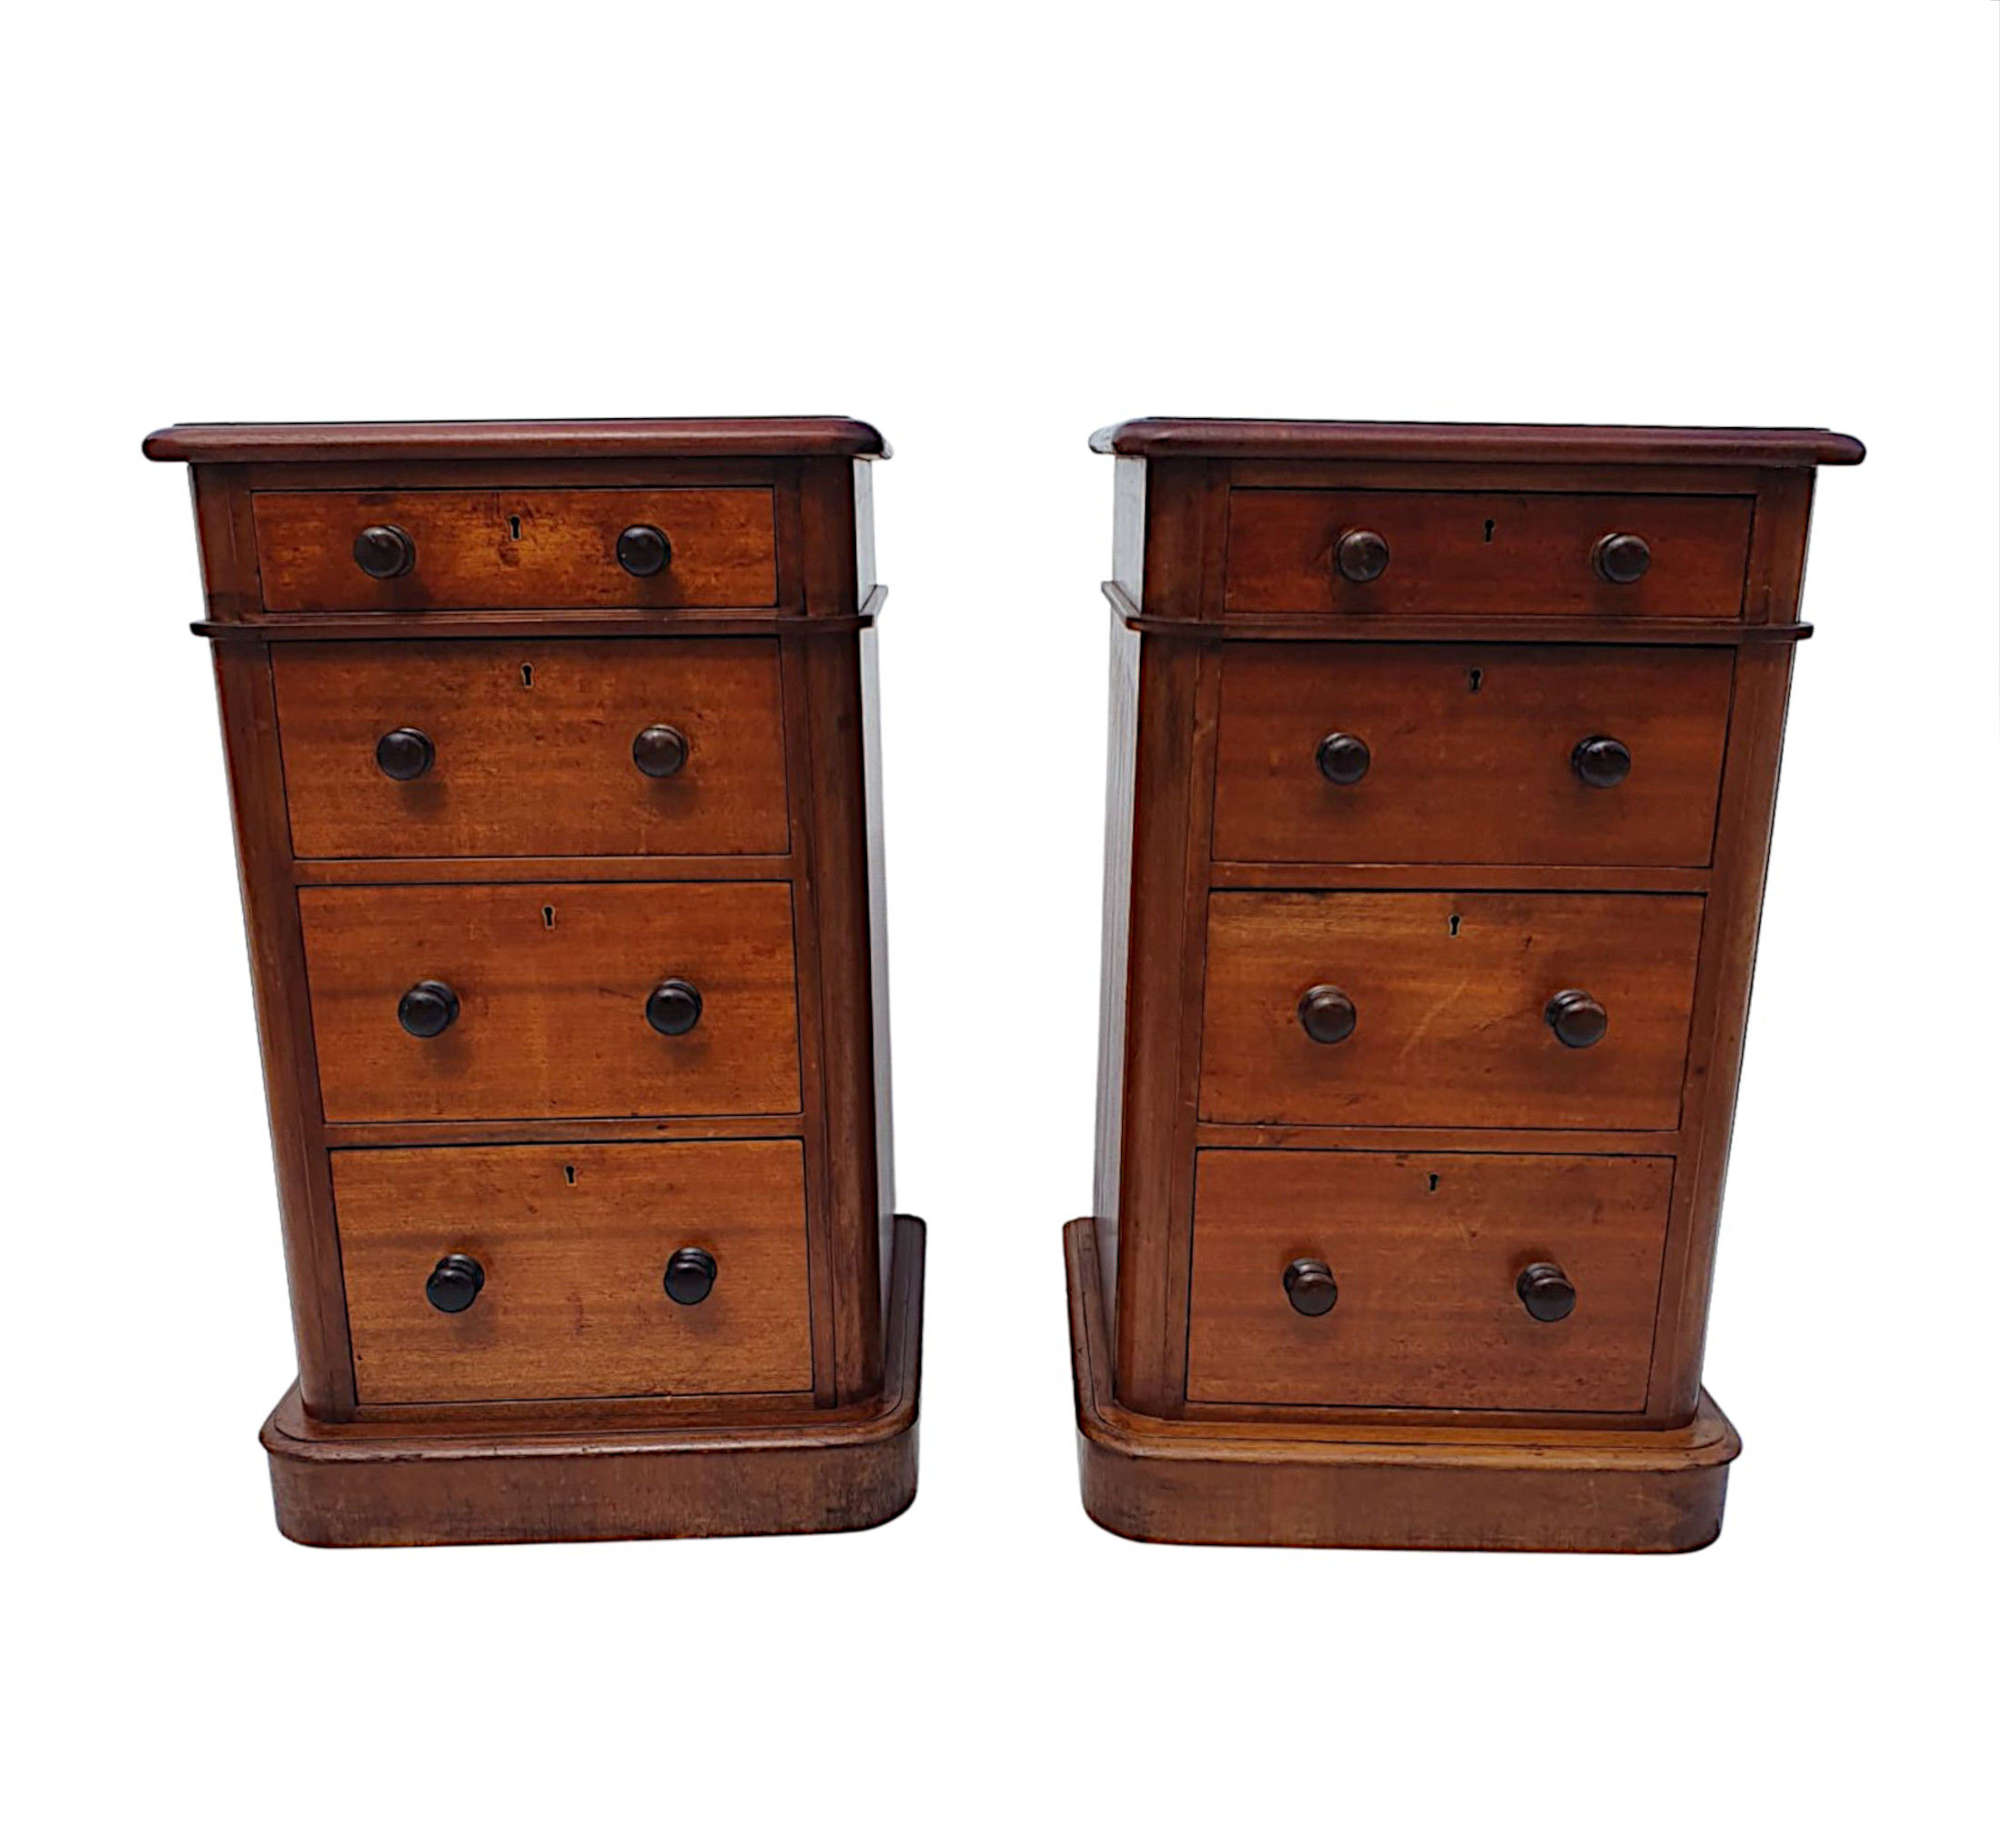 A Fine Pair of 19th Century Bedside Chests